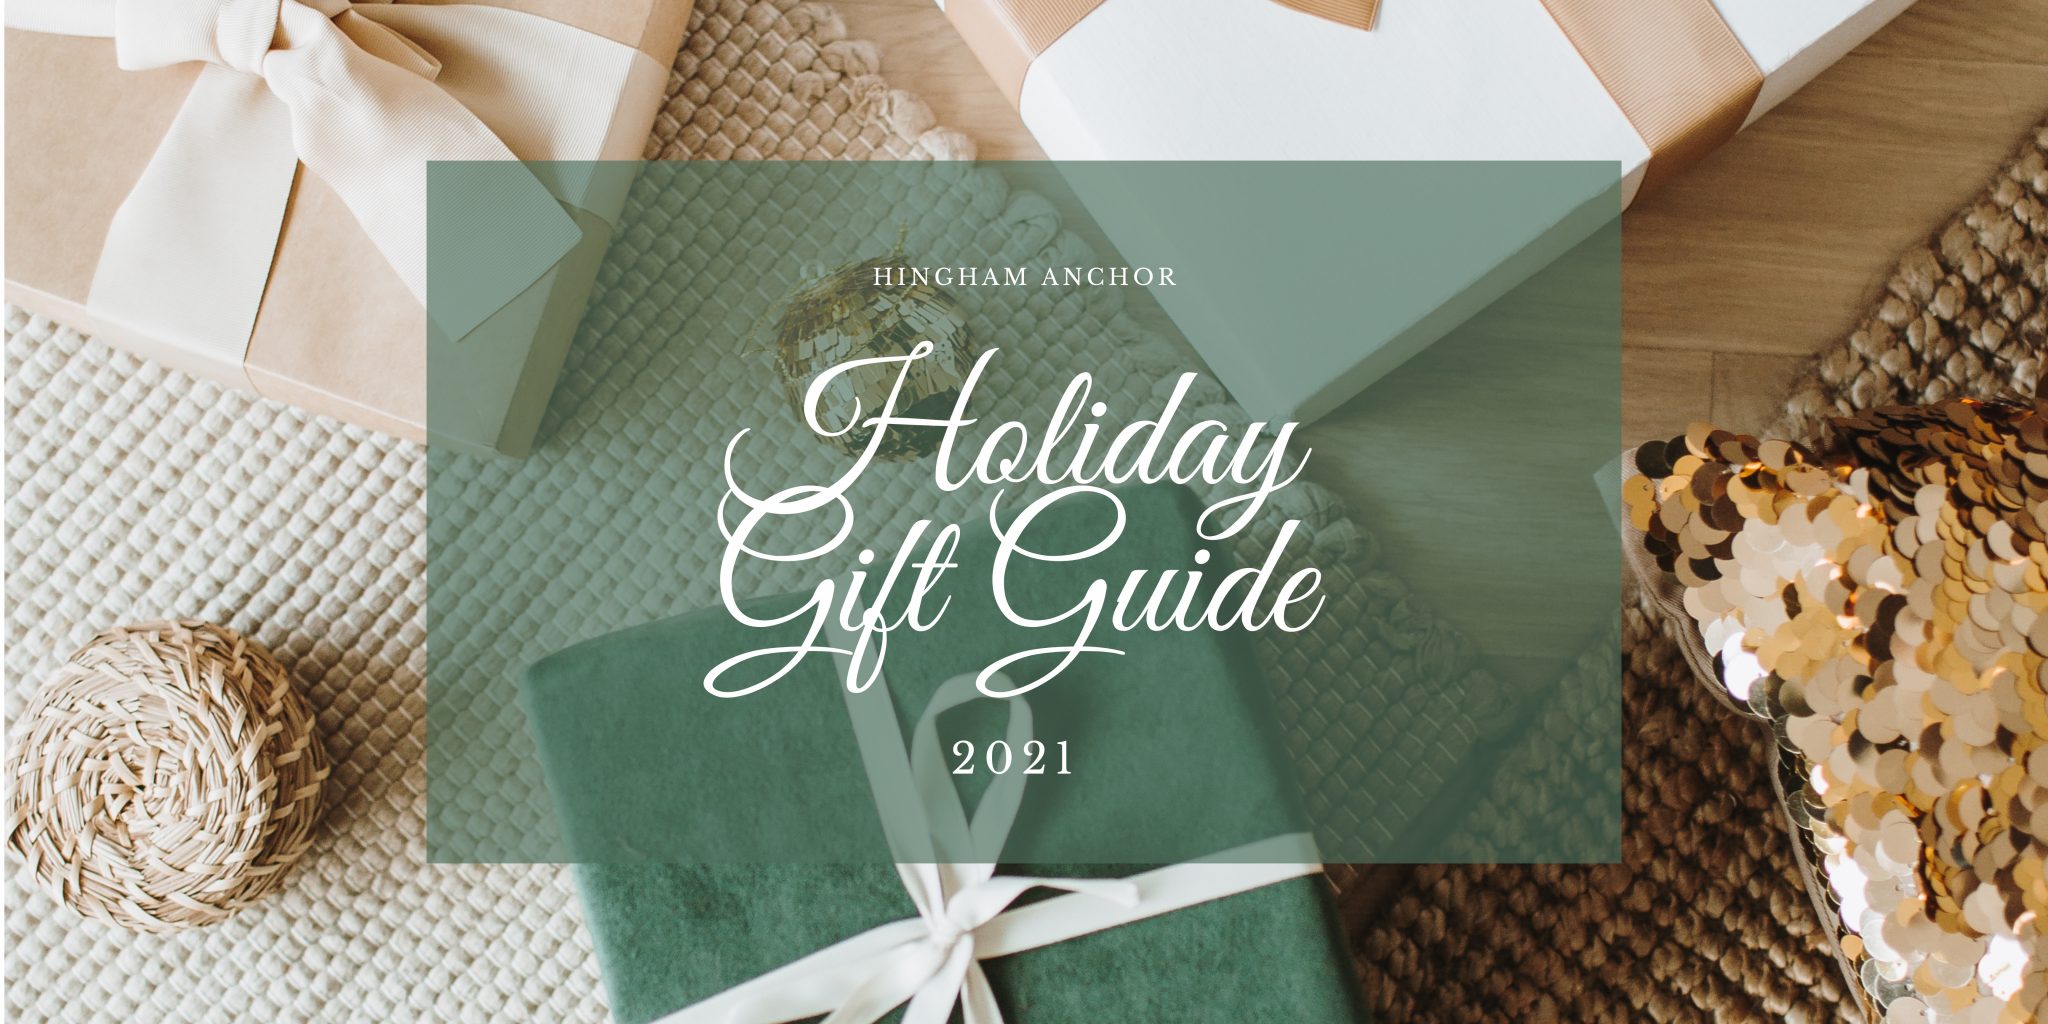 Anchor GIft Guide